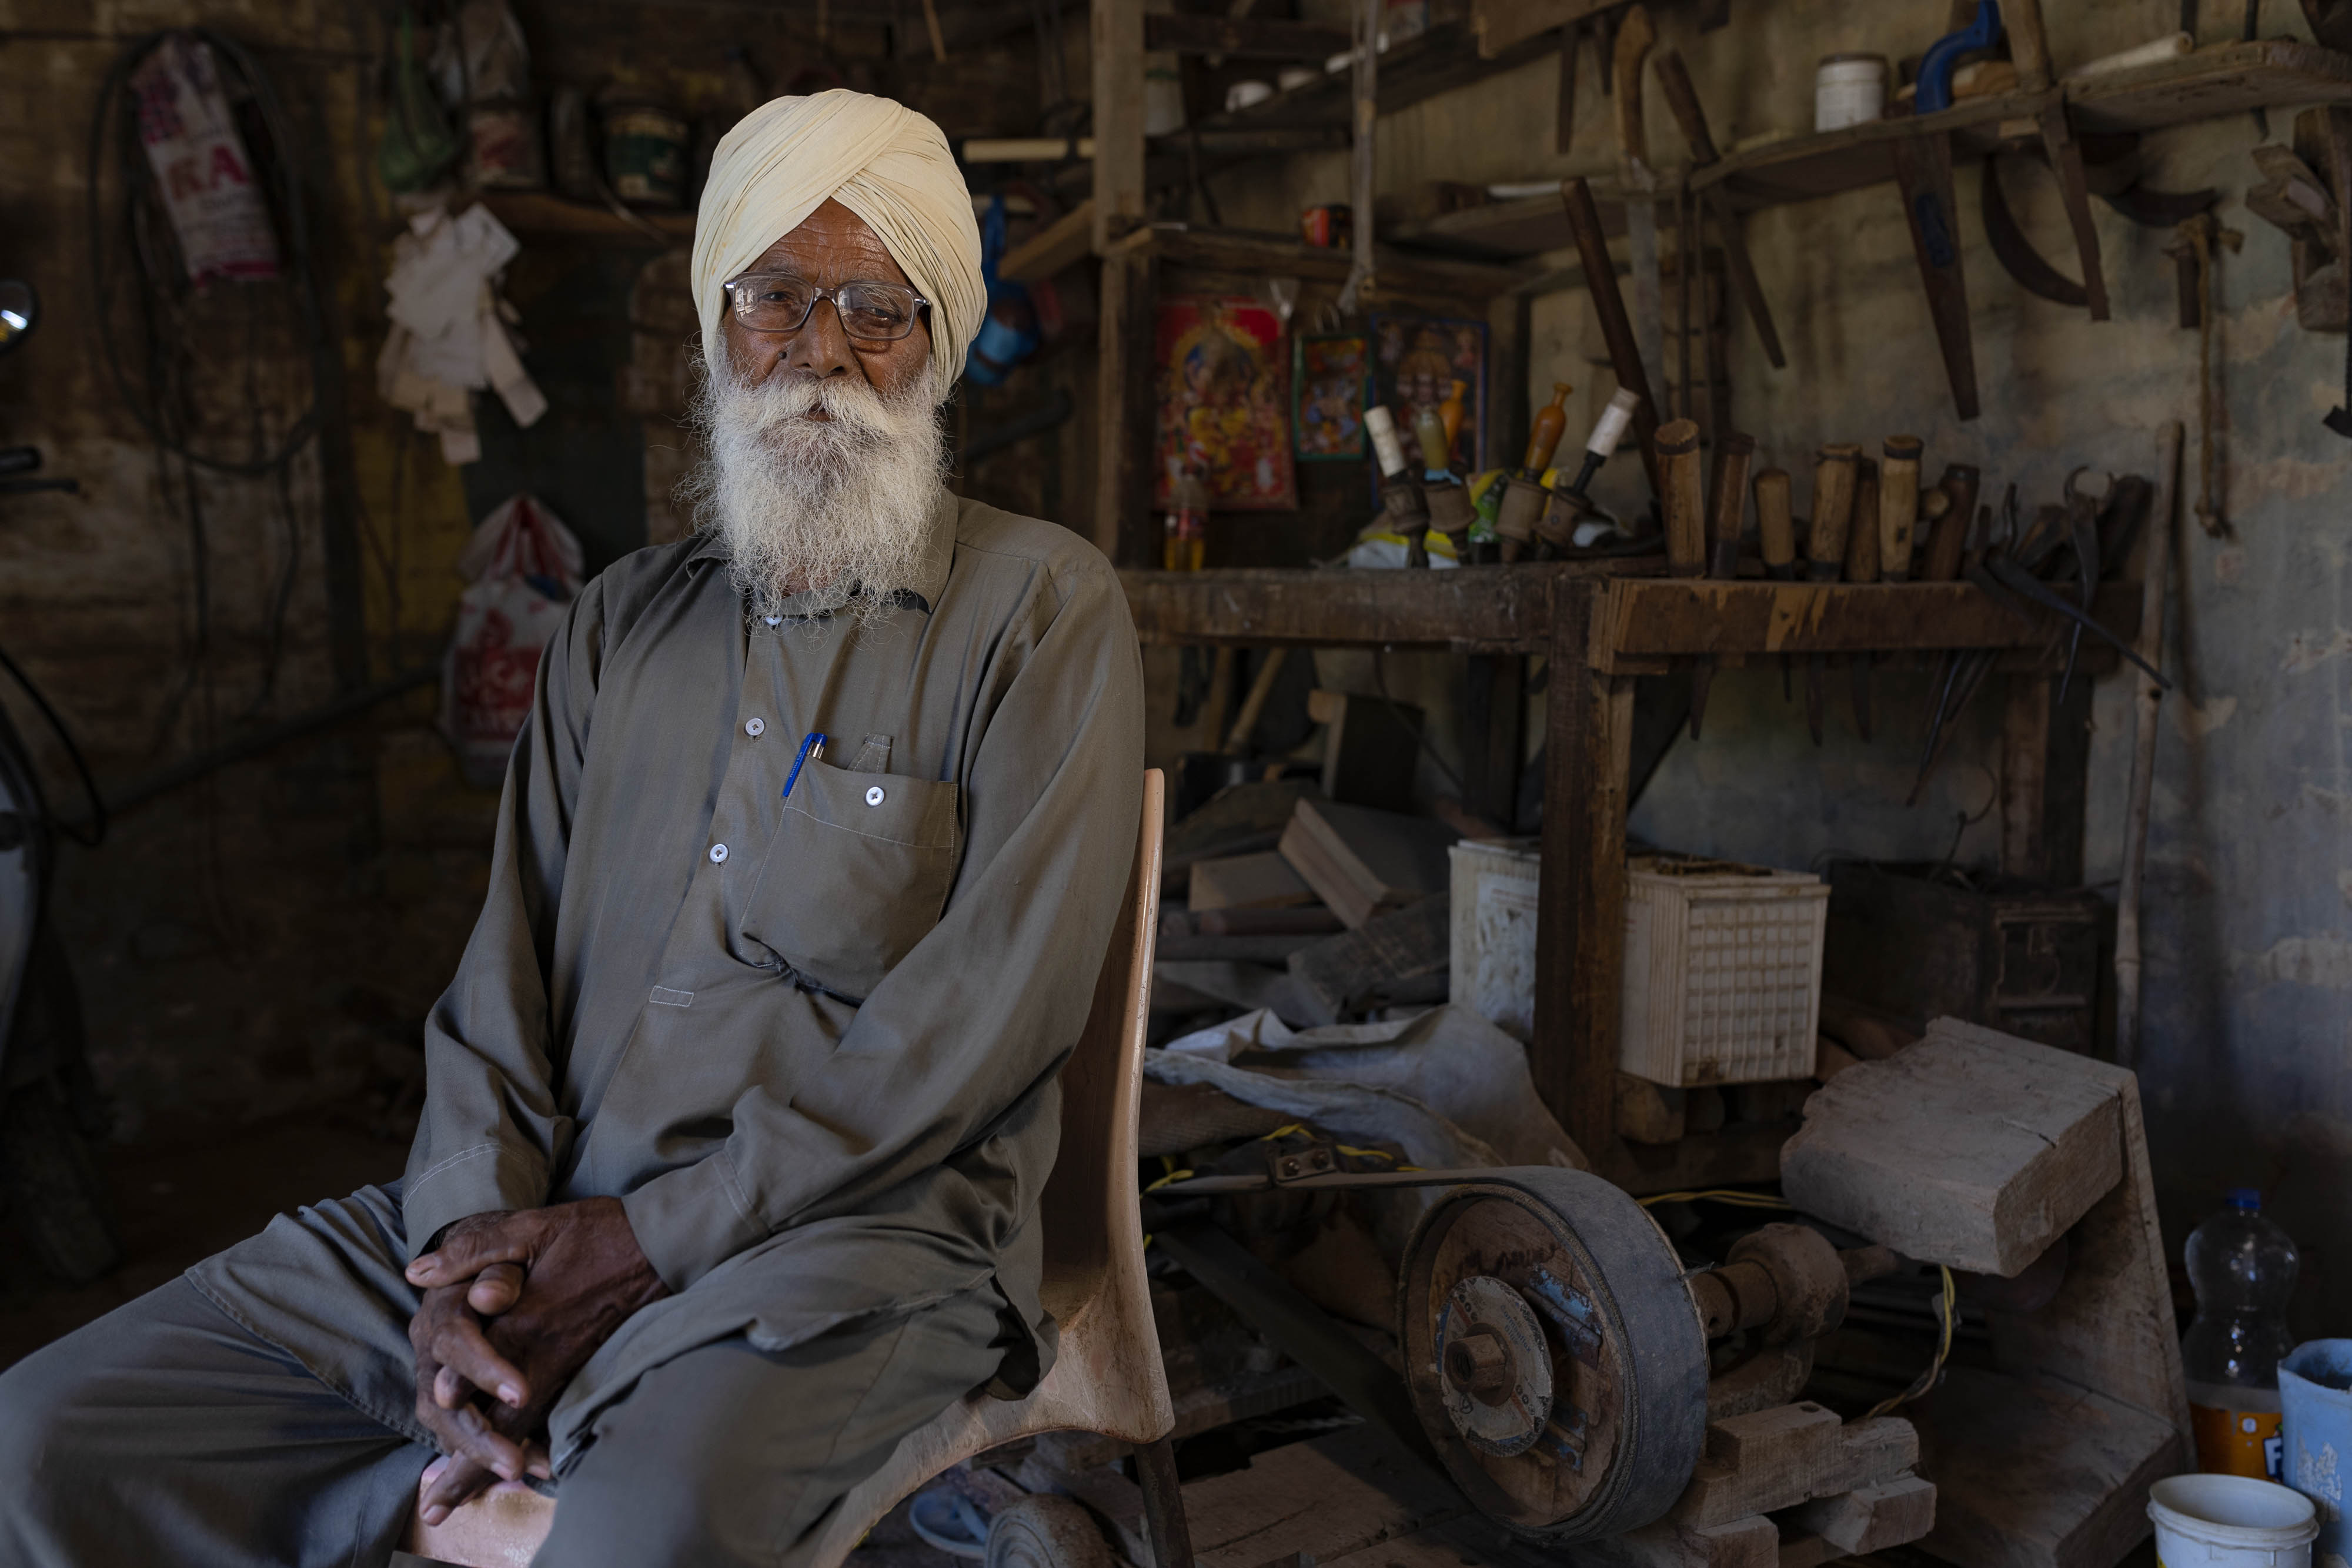 A portrait of Sardar Amar Singh as he sits in a room full of equipment.